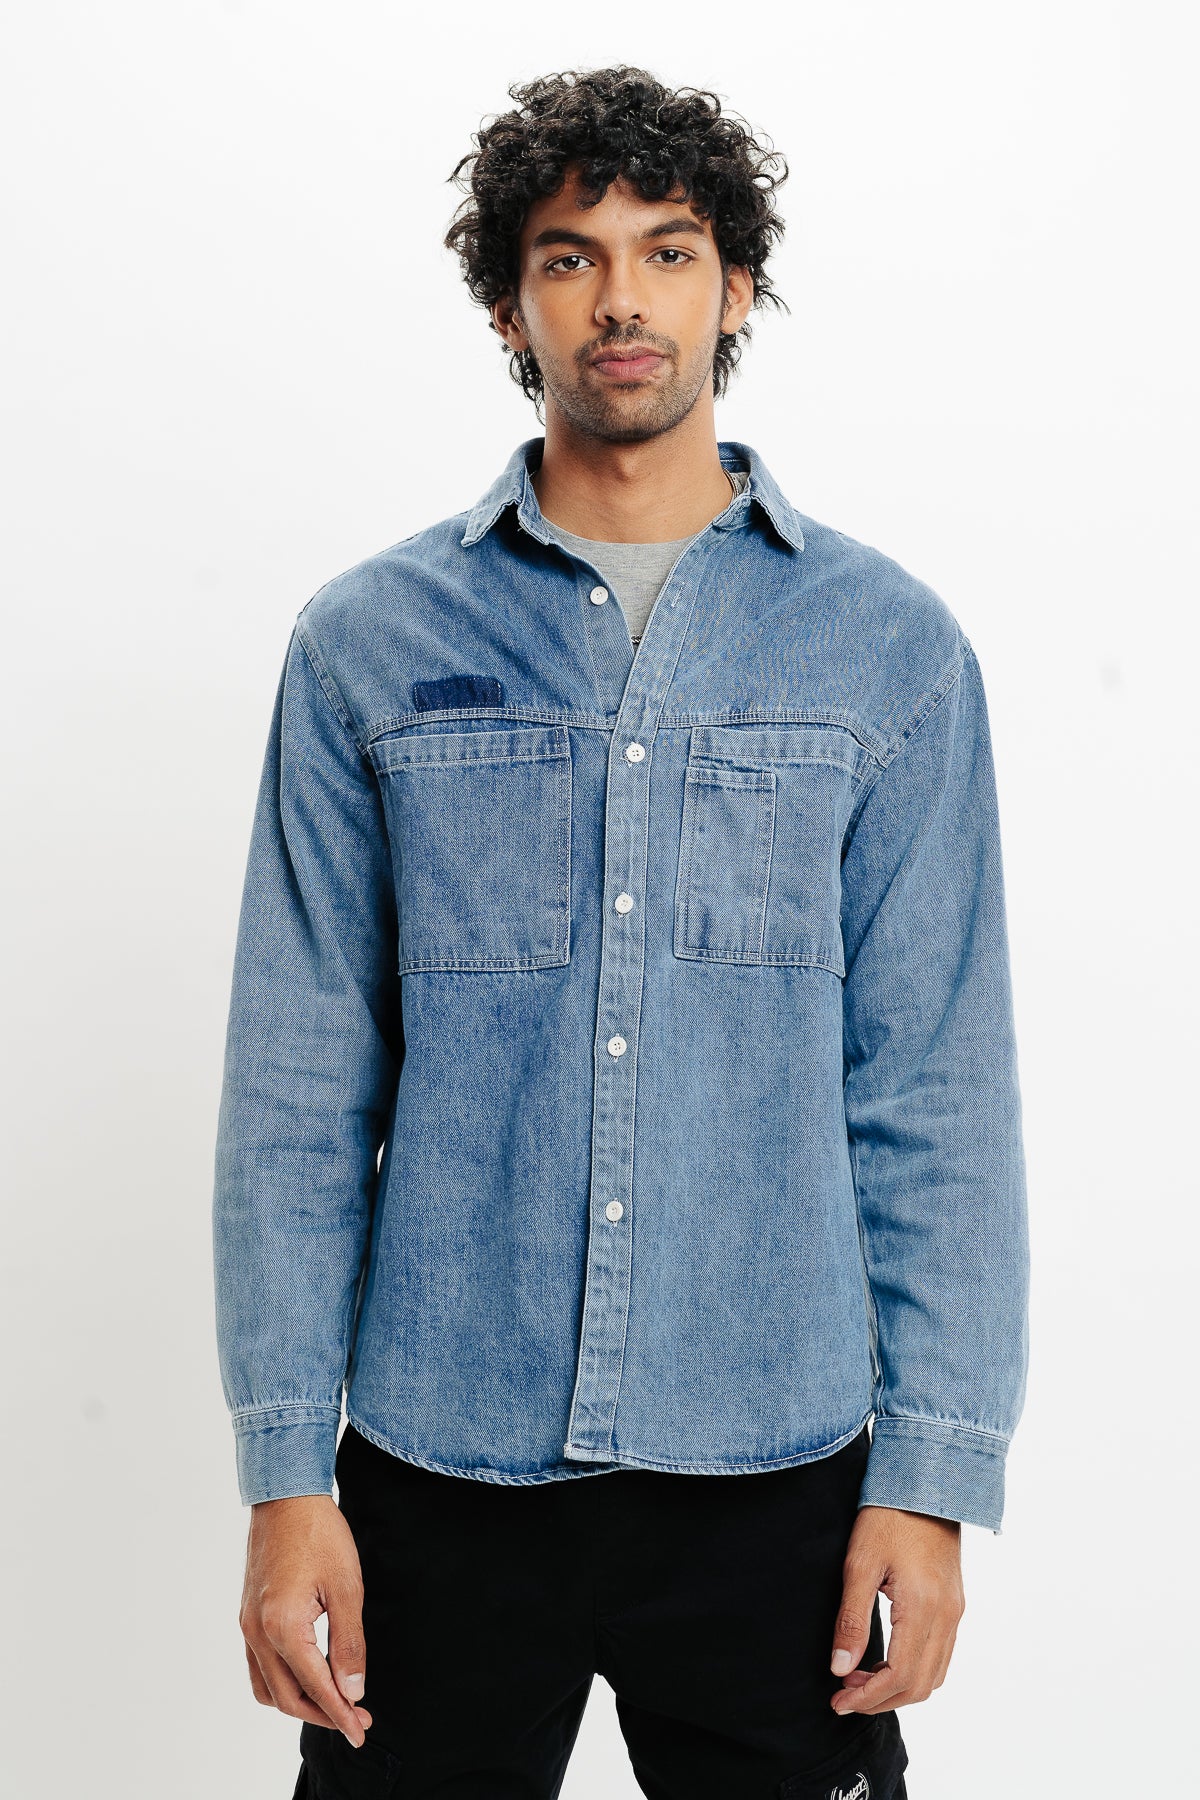 Check Out This Rugged Look Vintage Of This Denim Shirt With A Classic Jacket